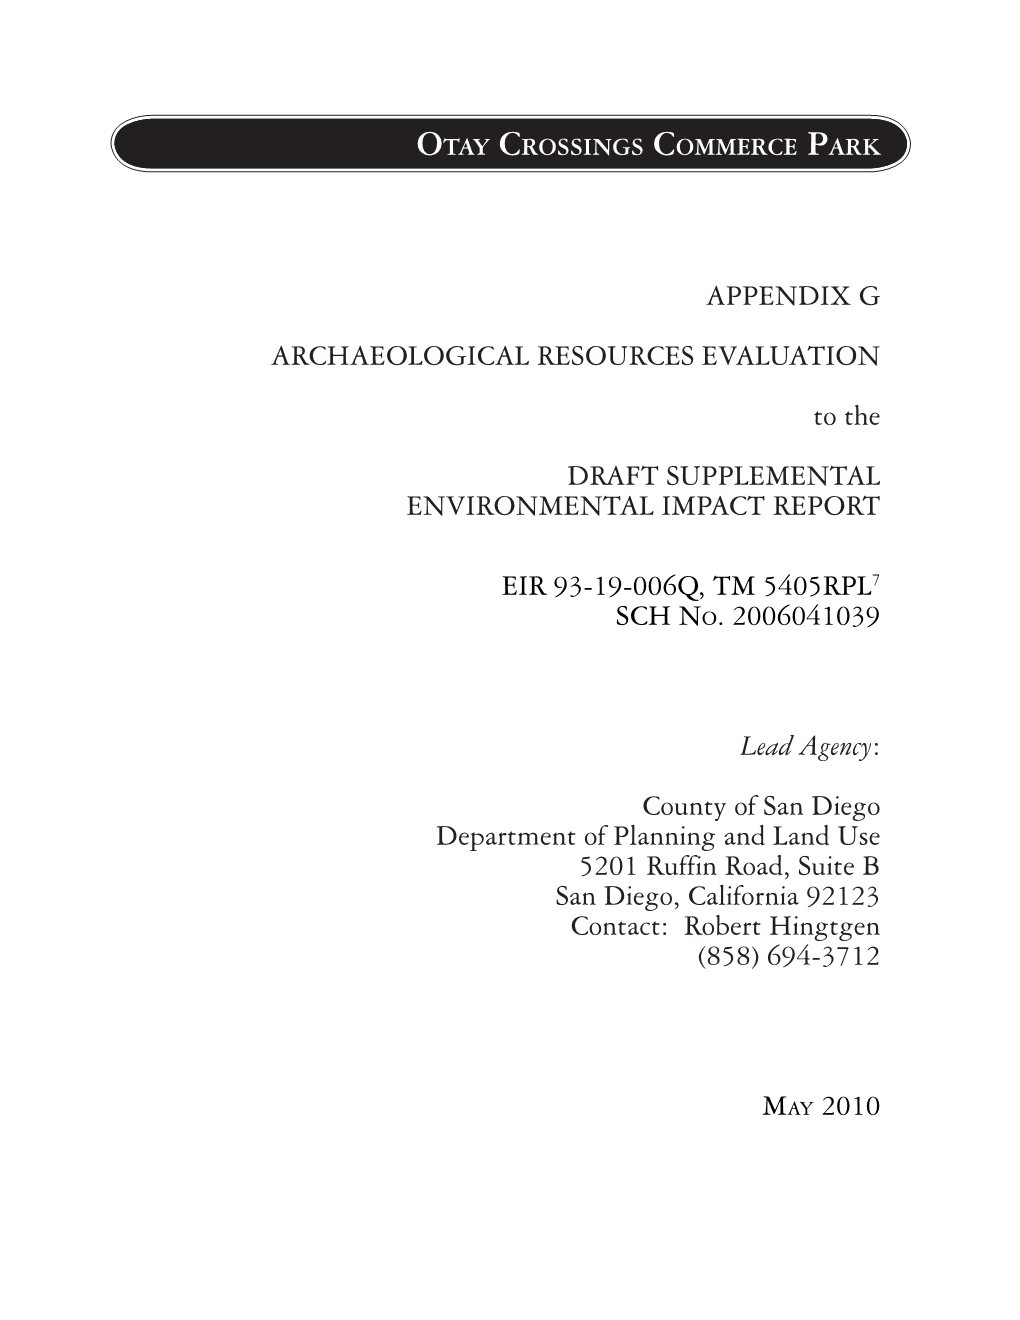 APPENDIX G ARCHAEOLOGICAL RESOURCES EVALUATION to the DRAFT SUPPLEMENTAL ENVIRONMENTAL IMPACT REPORT